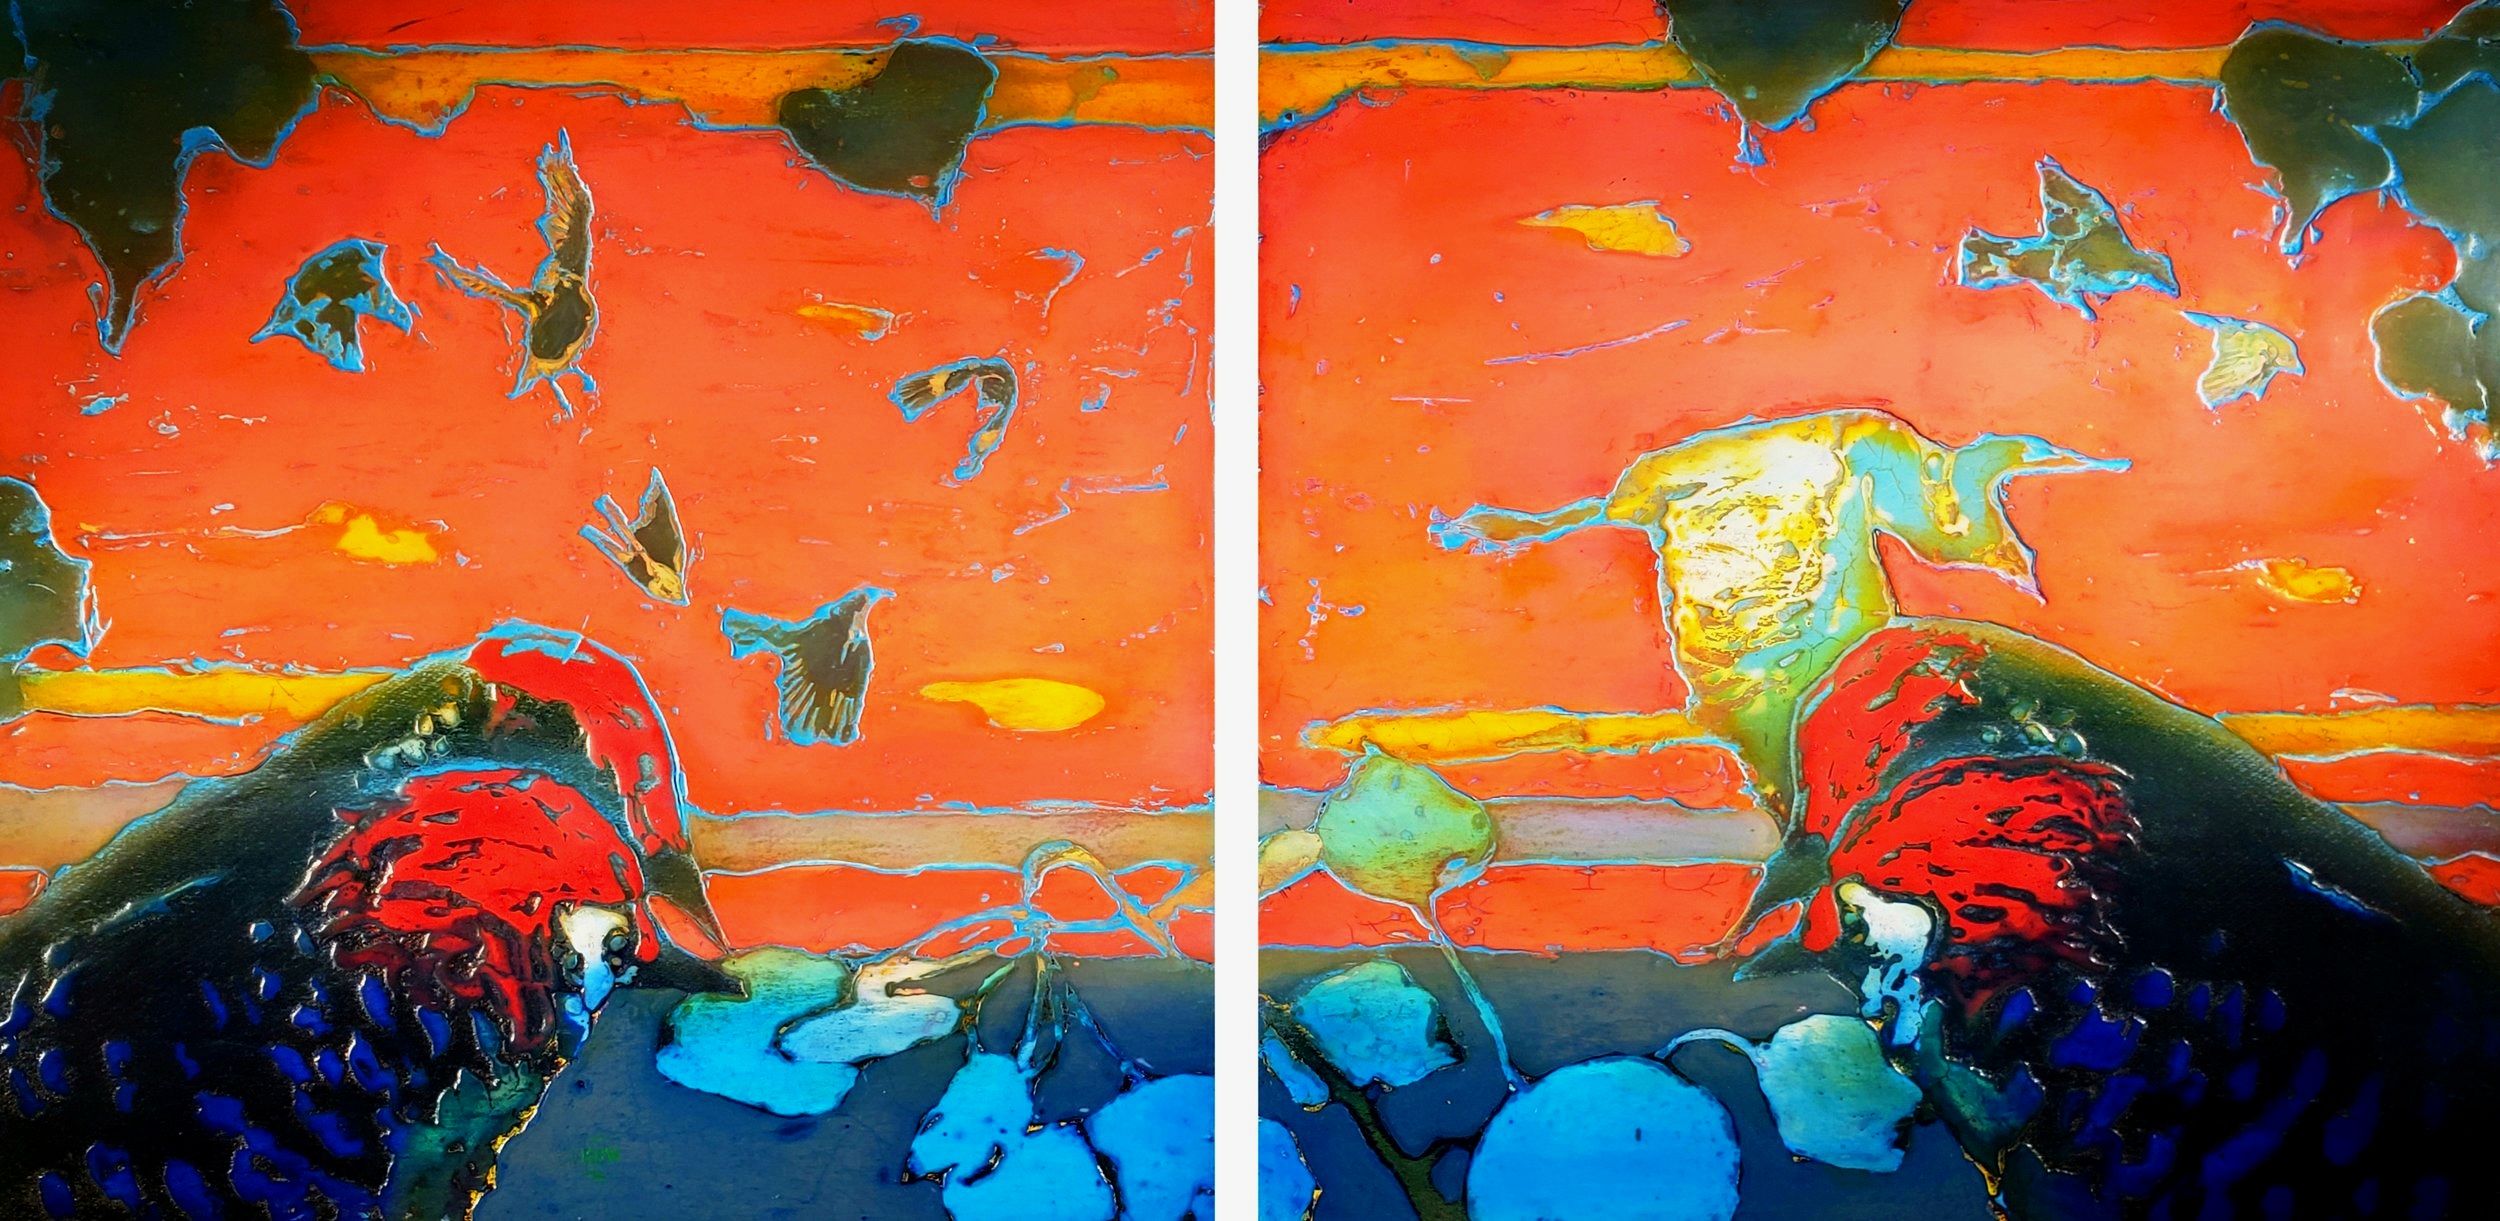 386 Dawn and Dusk 49" x 23.5" Oil on wood panel $4,600.